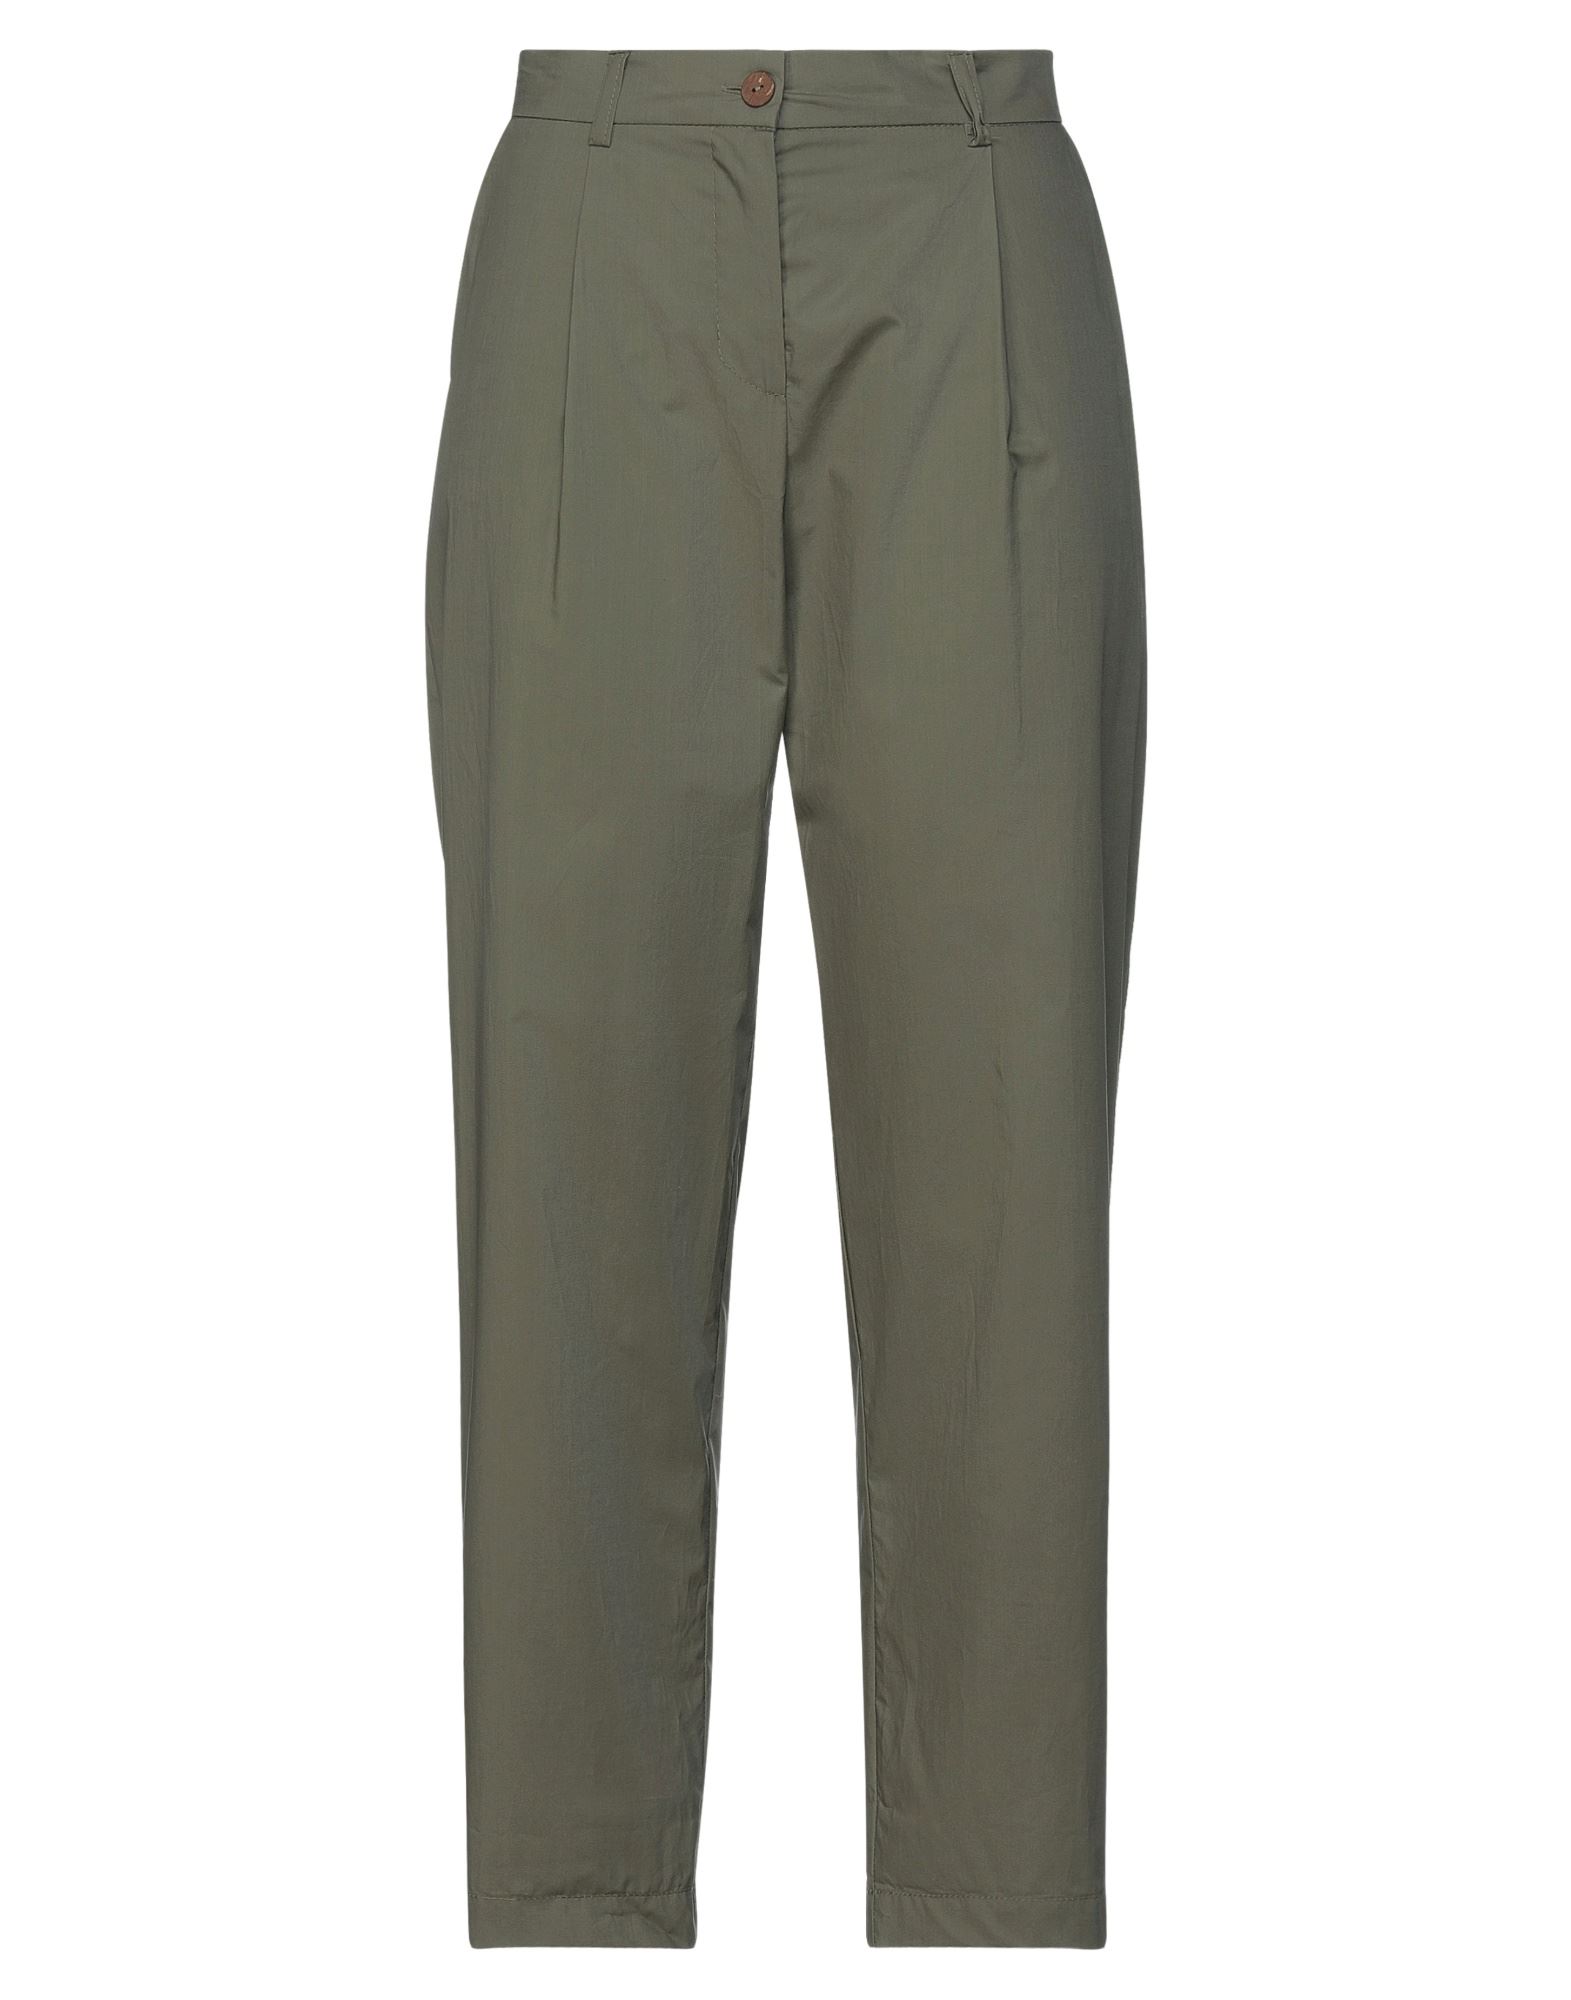 Kate By Laltramoda Pants In Military Green